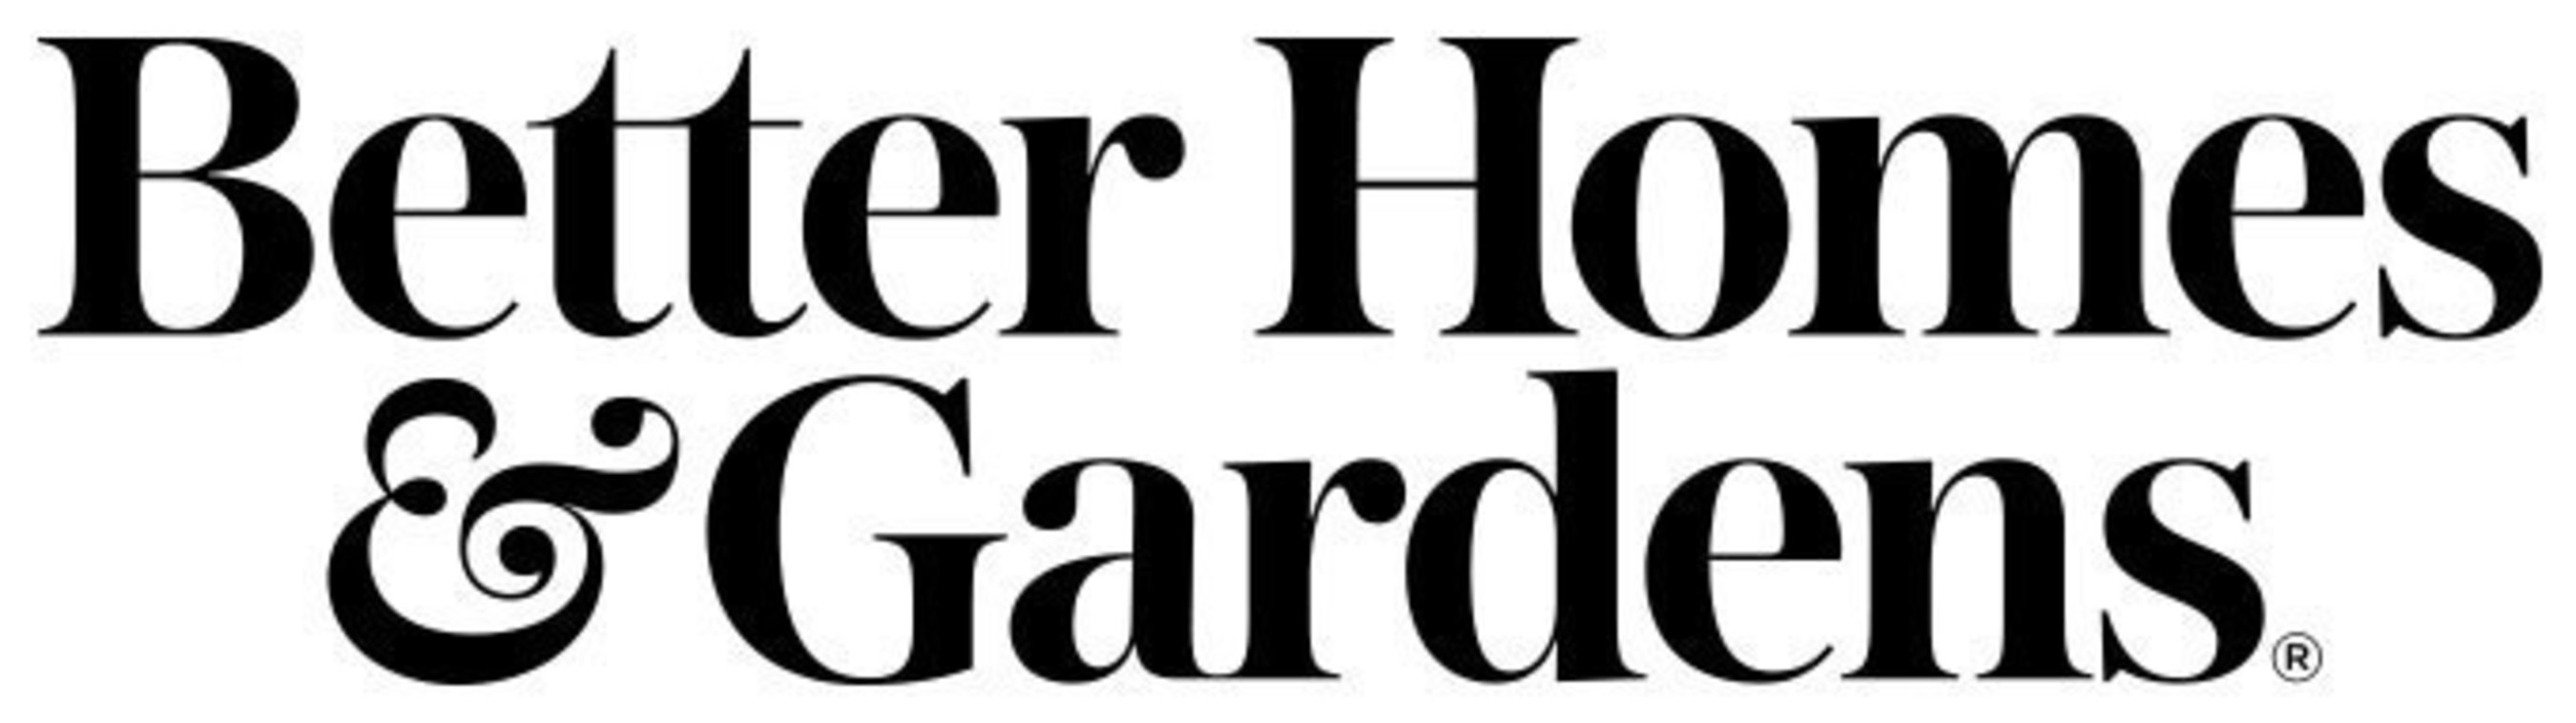 Better Homes & Gardens Reveals New Logo With January Issue